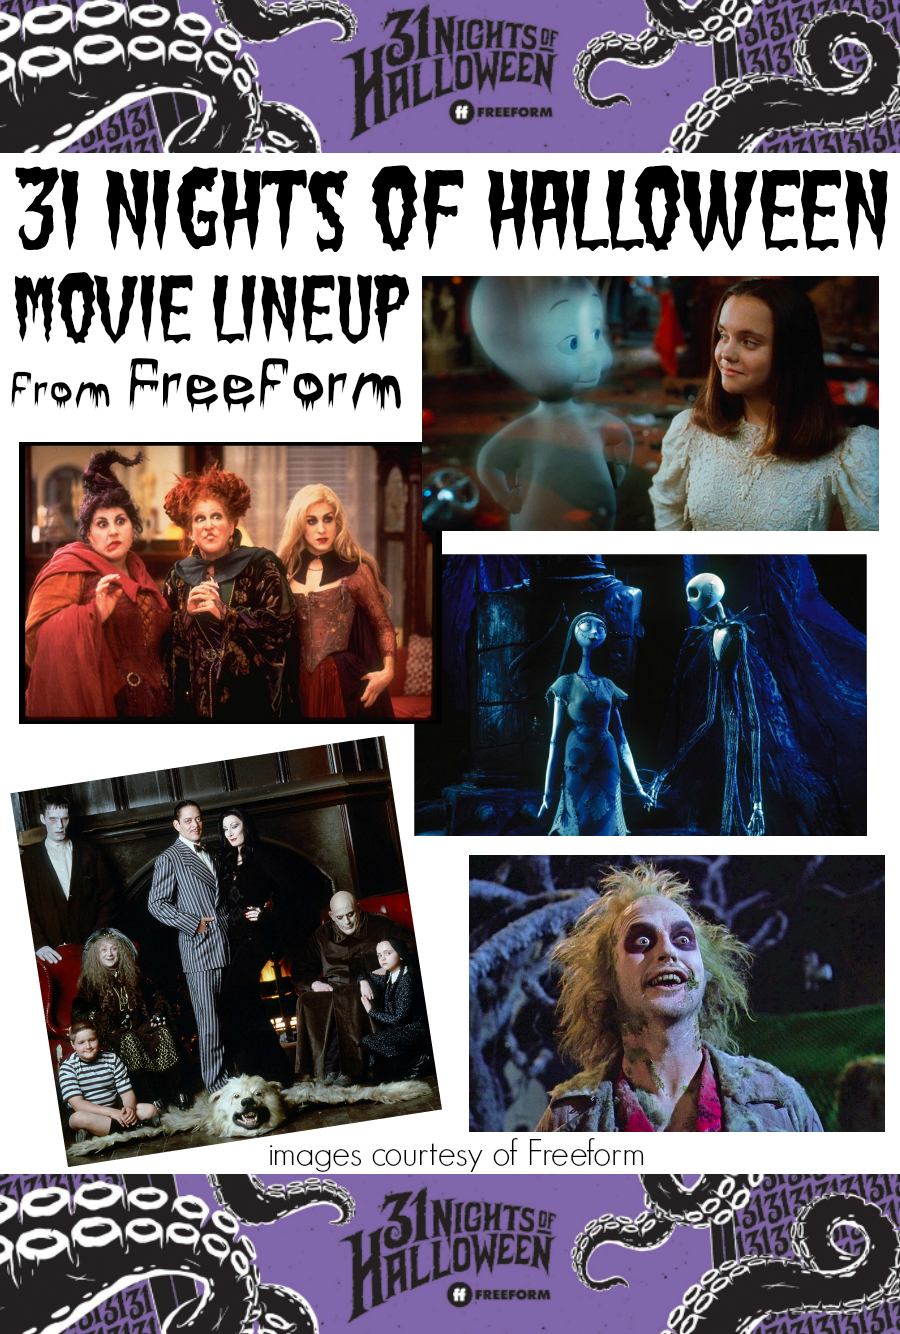 31 Nights of Halloween from Freeform Movie Lineup 